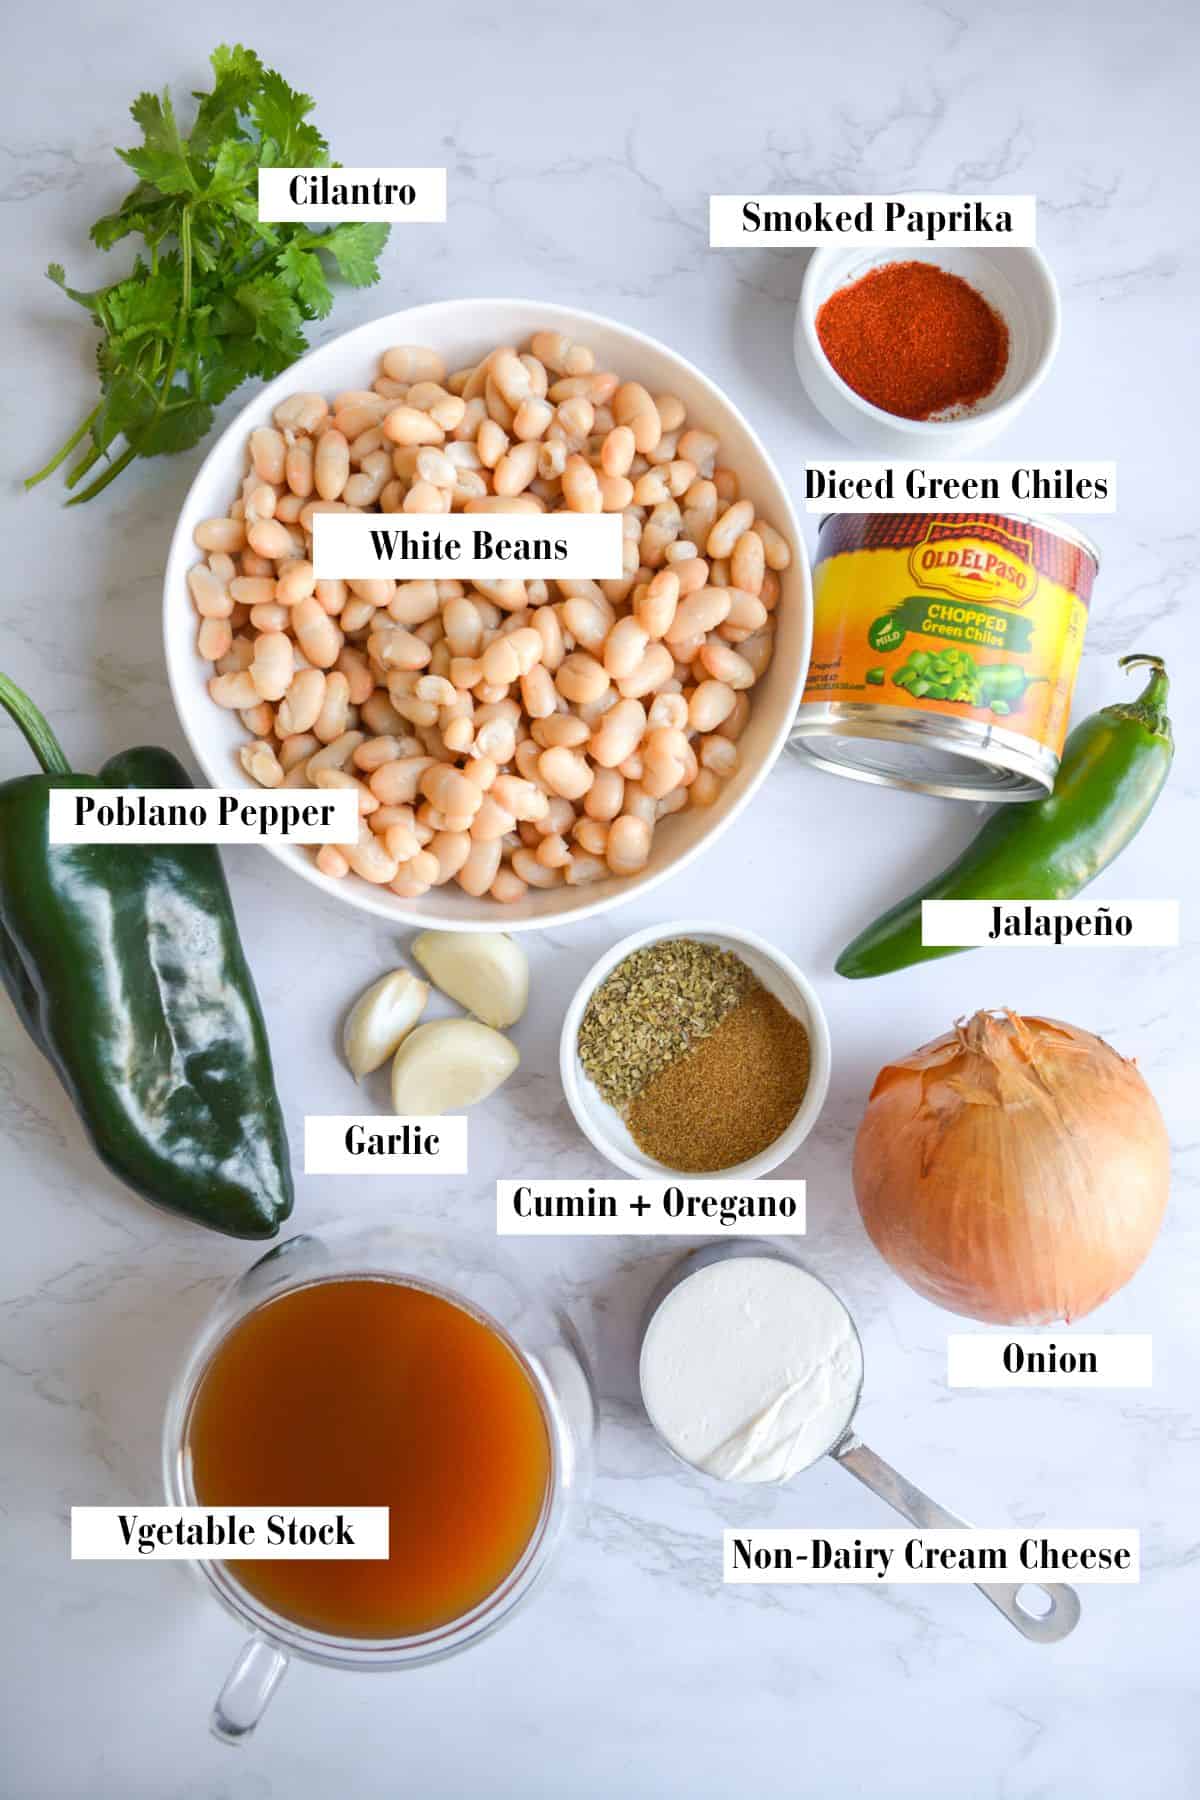 Photo of ingredients needed to make this recipe.